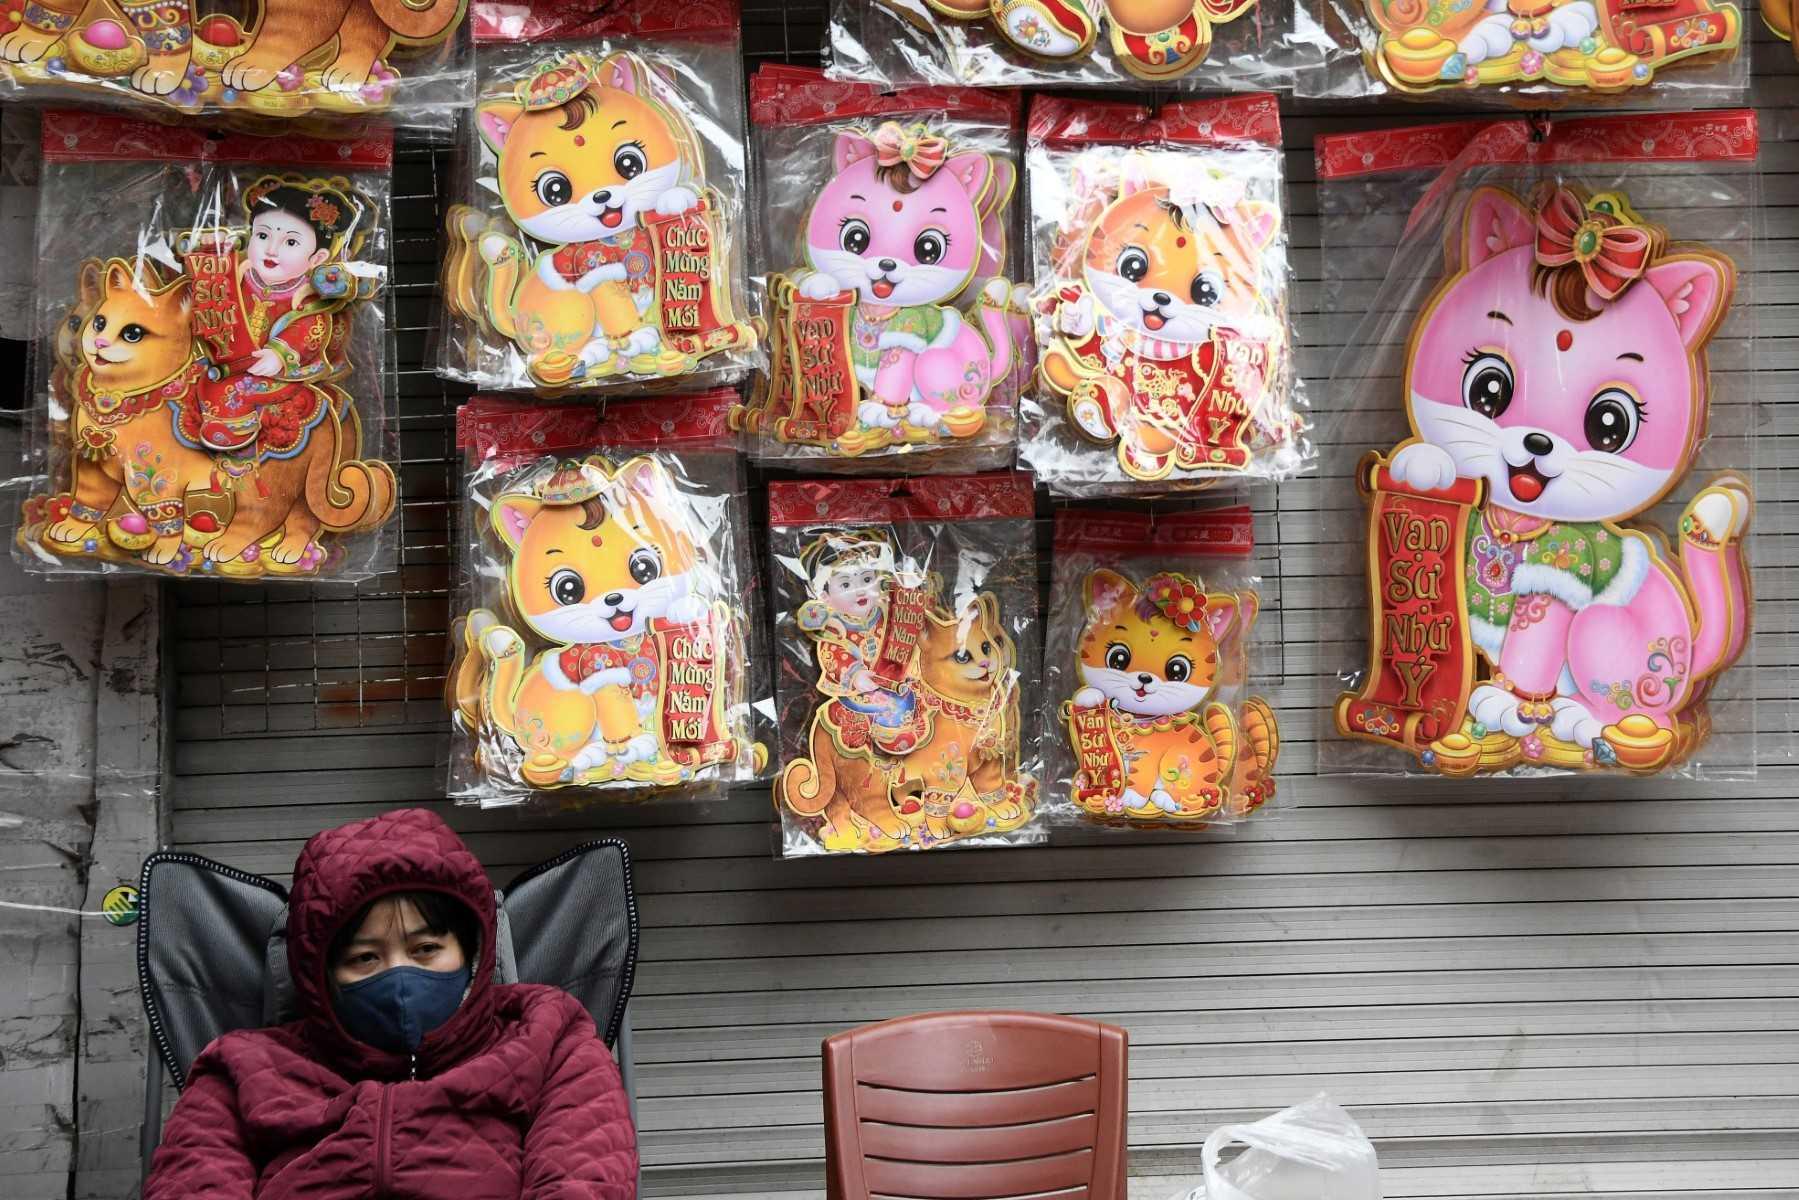 A shopkeeper waits for customers at a stall selling cat decorations at a market in the old quarters of Hanoi, Jan 17. Photo: AFP